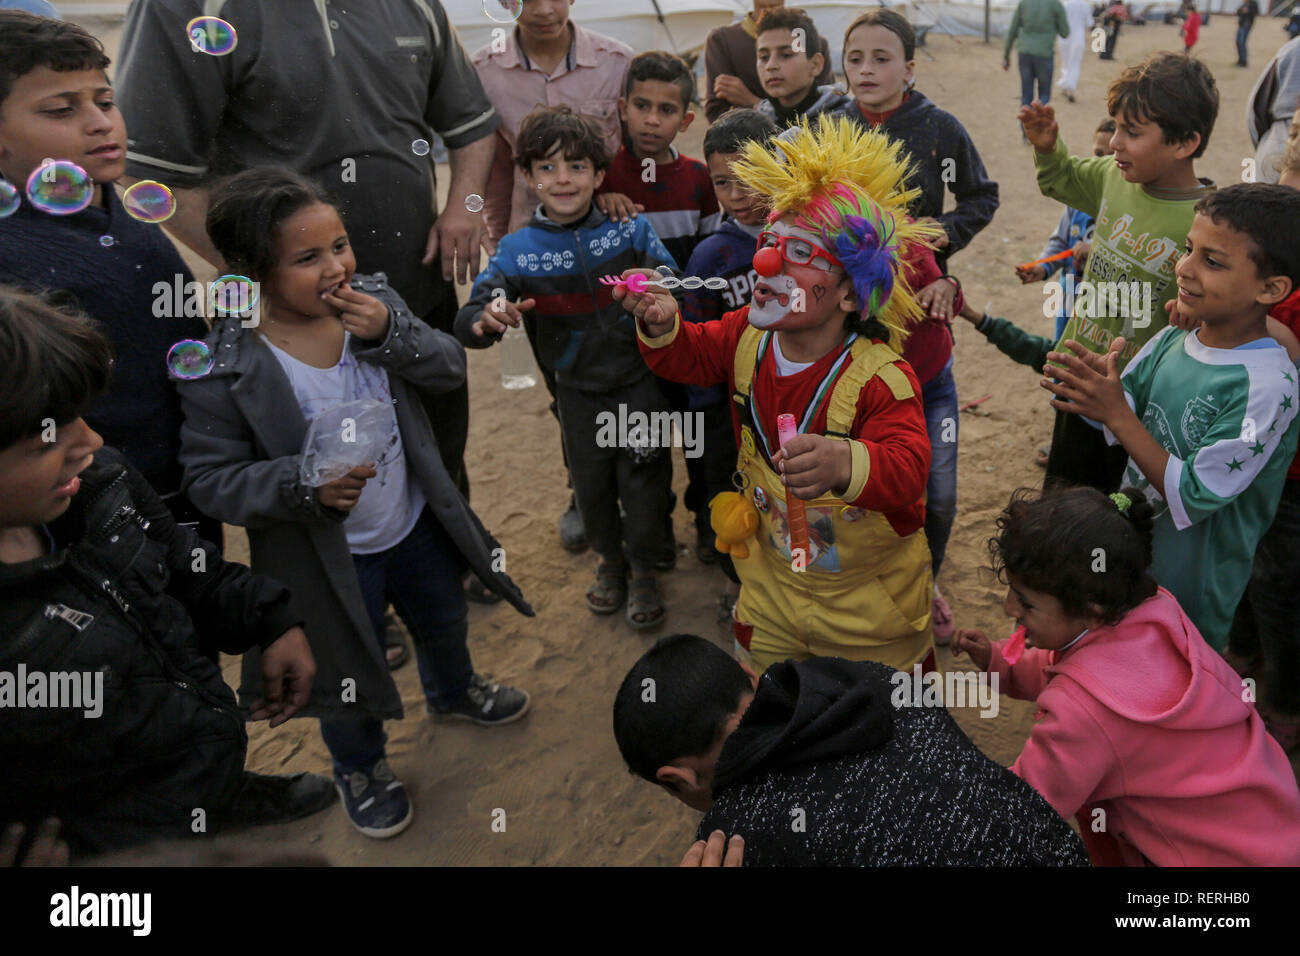 Gaza, Palestine. Autonomous Areas. 02nd Apr, 2018. The Palestinian clown Alaa Mekdad (34) plays with refugee children in the tent city built on the occasion of the protest action 'March of Return' at the border to Israel in the Gaza Strip. The photograph by dpa photographer Mohammed Talatene won 1st place in the Story category in the dpa Picture of the Year 2018 competition. Credit: Mohammed Talatene/dpa/Alamy Live News Stock Photo